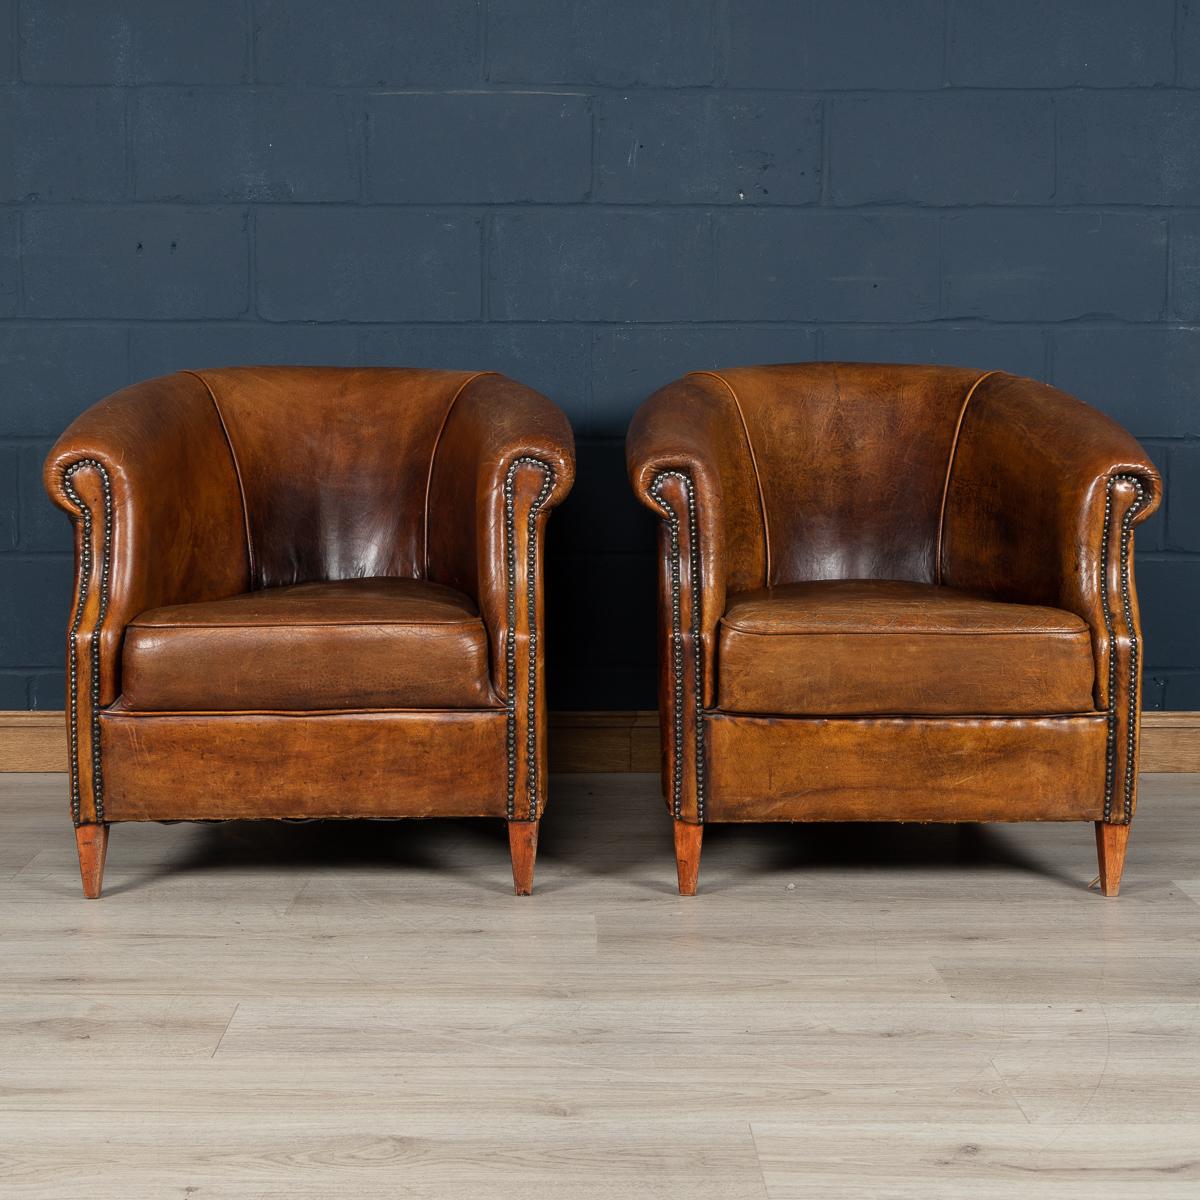 Showing superb patina and colour, this wonderful pair of club chairs were hand upholstered sheepskin leather in Holland by the finest craftsmen. Fantastic look for any interior, both modern and traditional.

Please note that our interior pieces